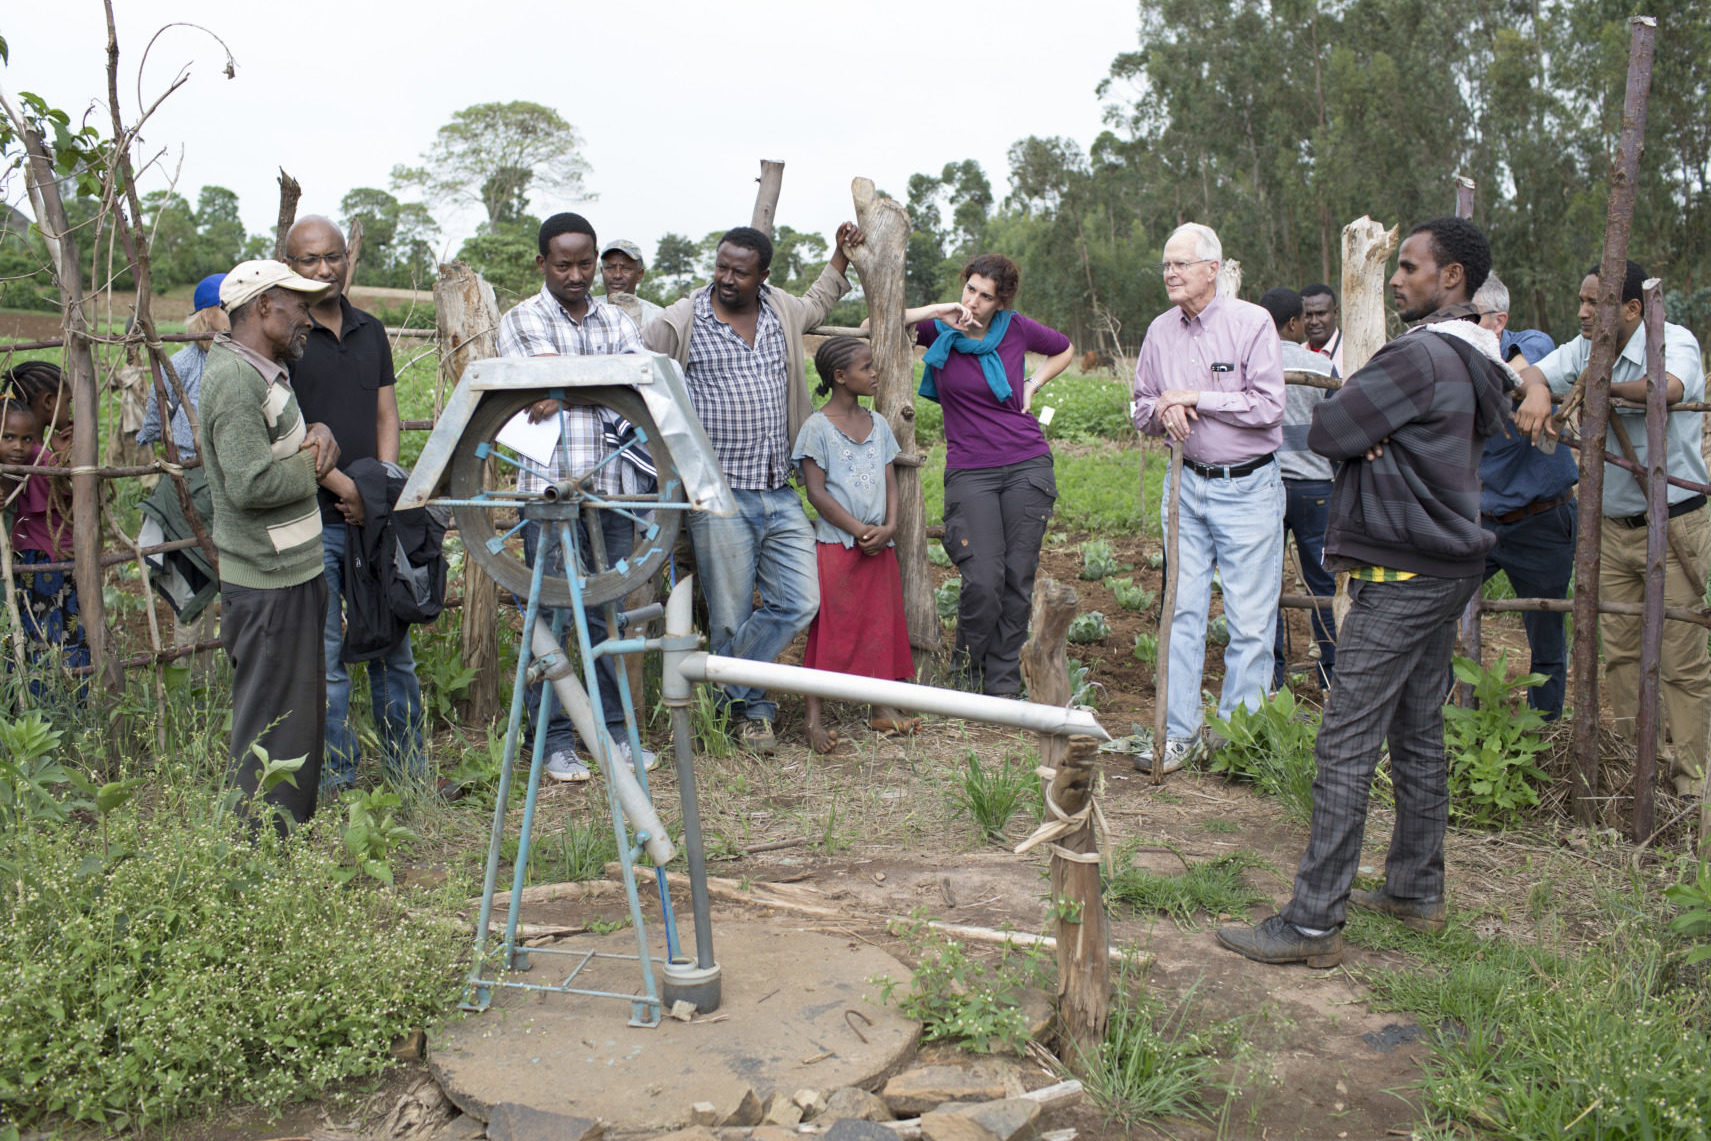 A group of people, both scientists and families, stand outside around a water pump in a jungle-looking area.